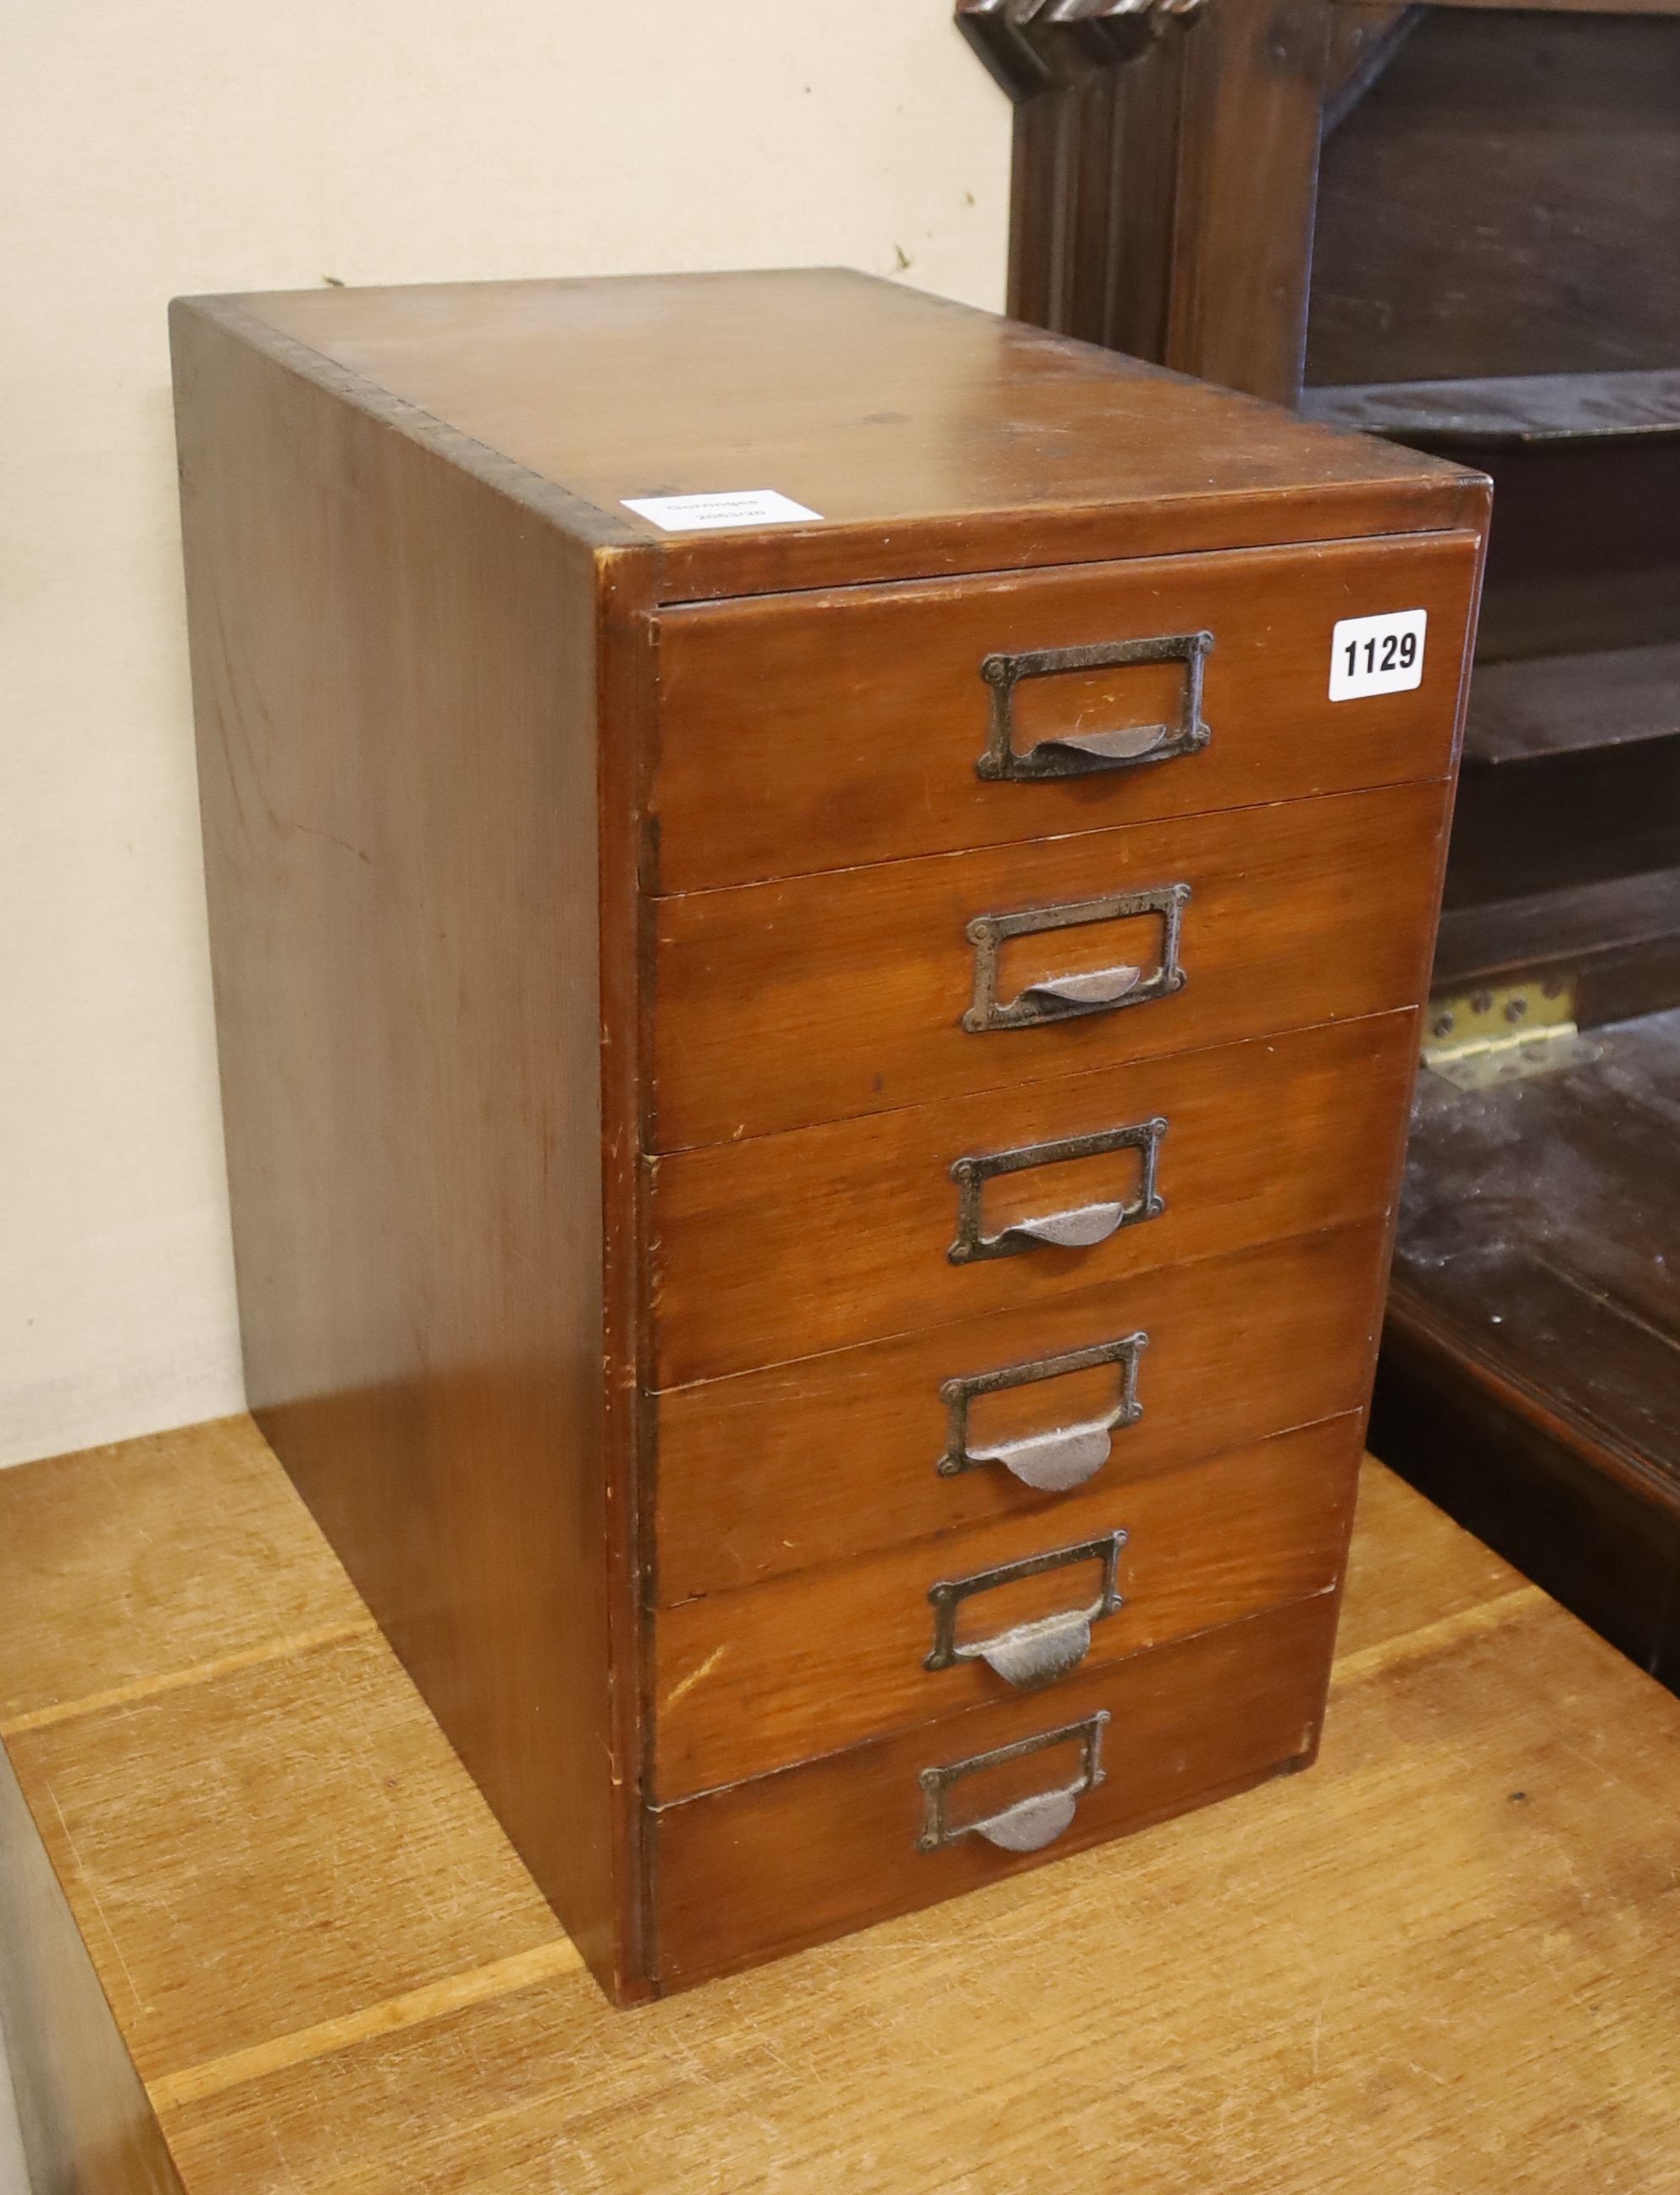 An early 20th century desk top filing cabinet, width 26cm, depth 38cm, height 45cm